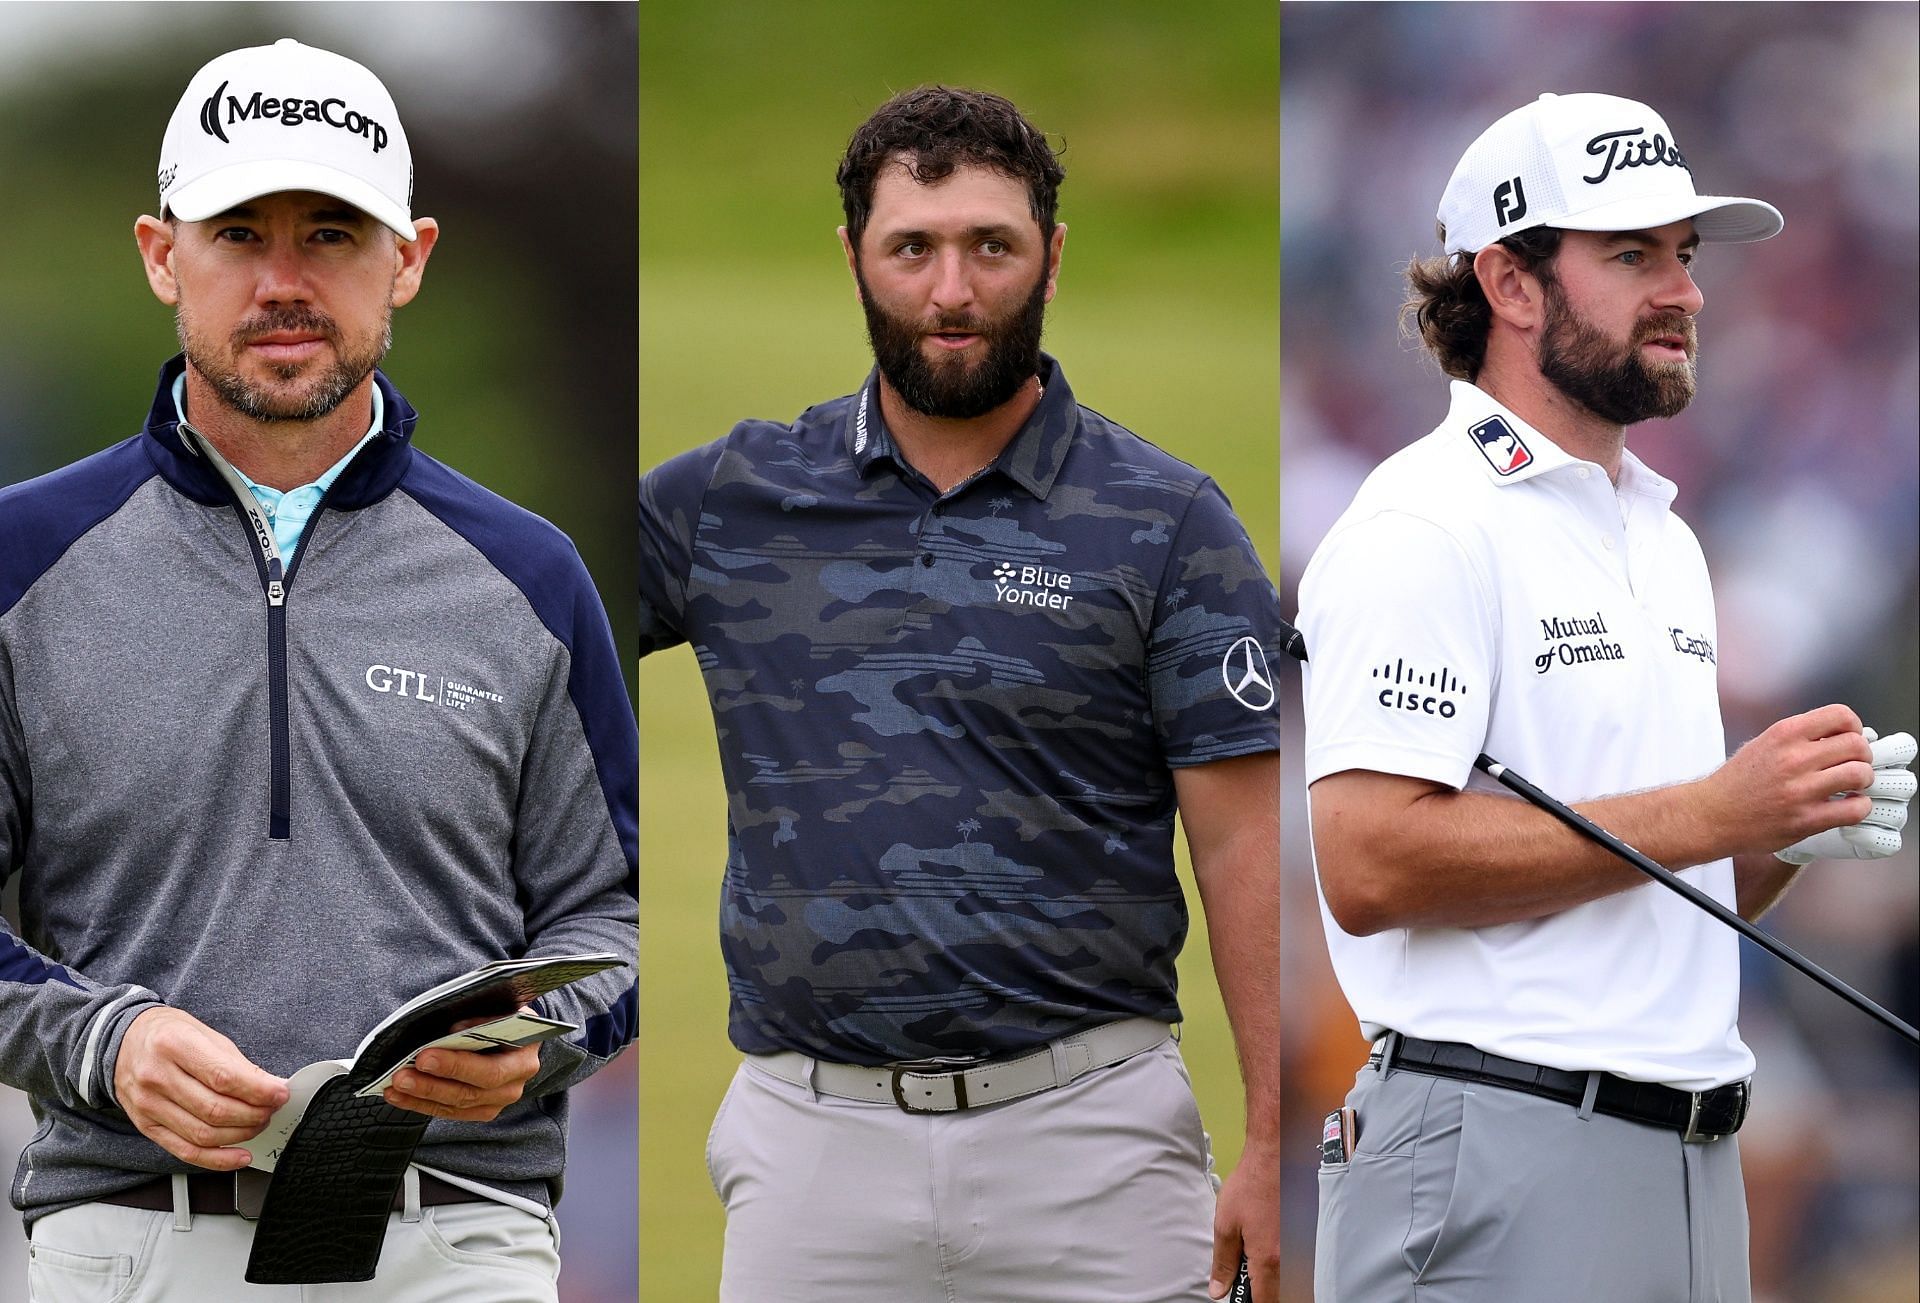 Predicting the Champion of the 2023 British Open Who's Got the Edge